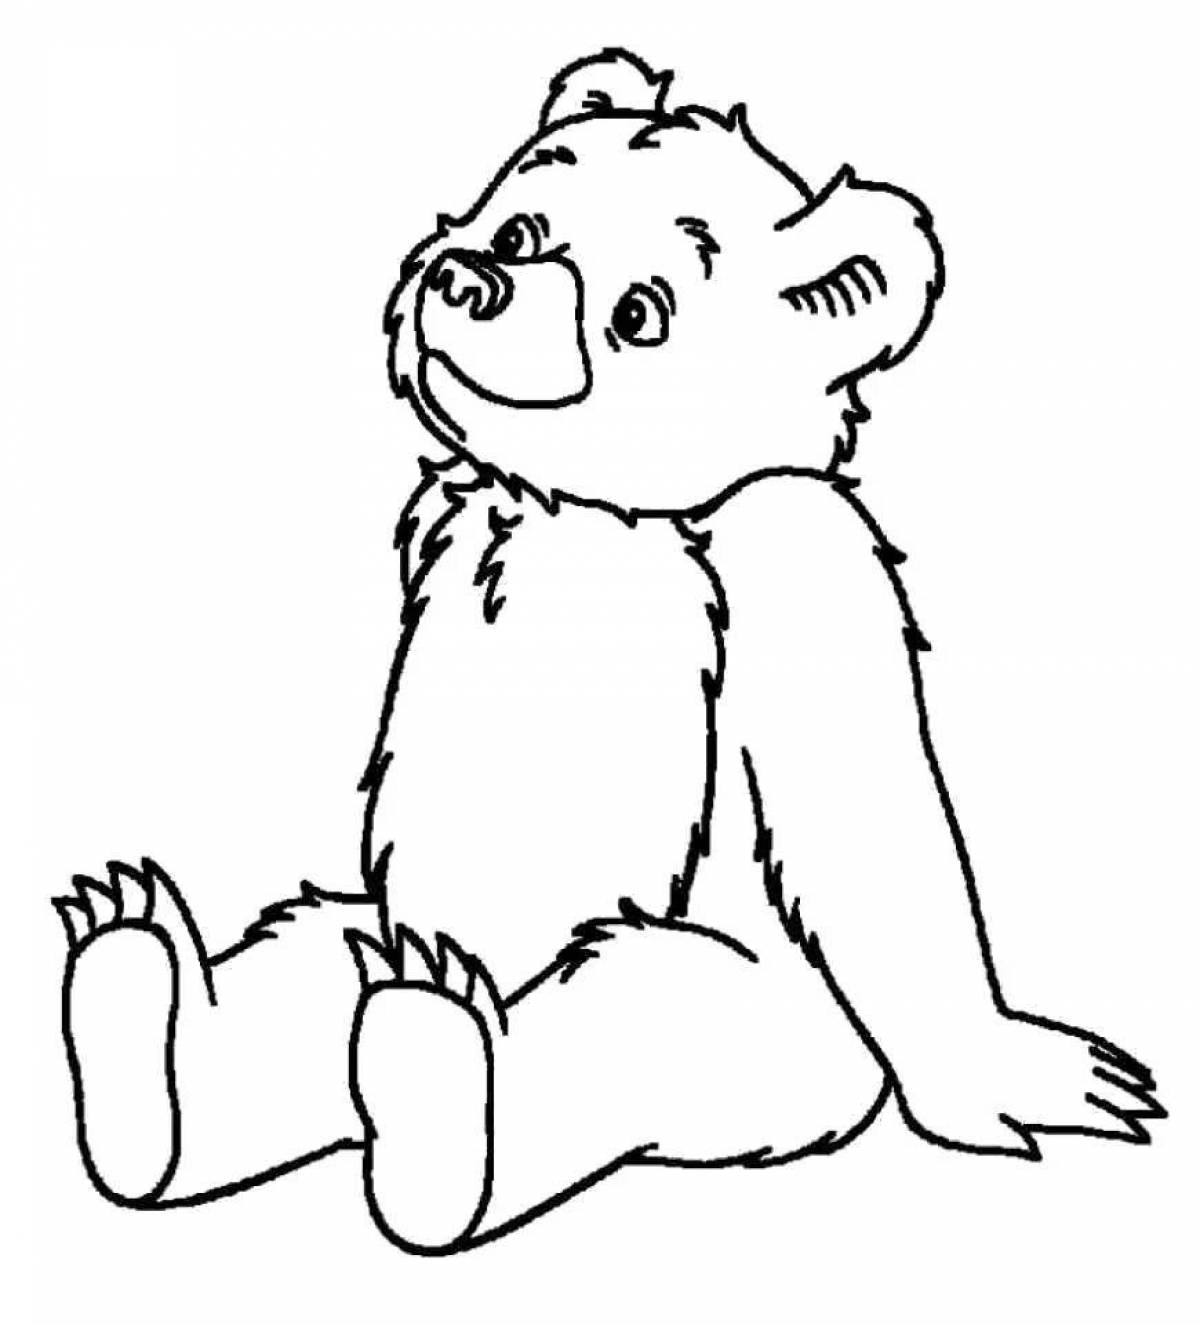 Coloring page mischievous bear and cub